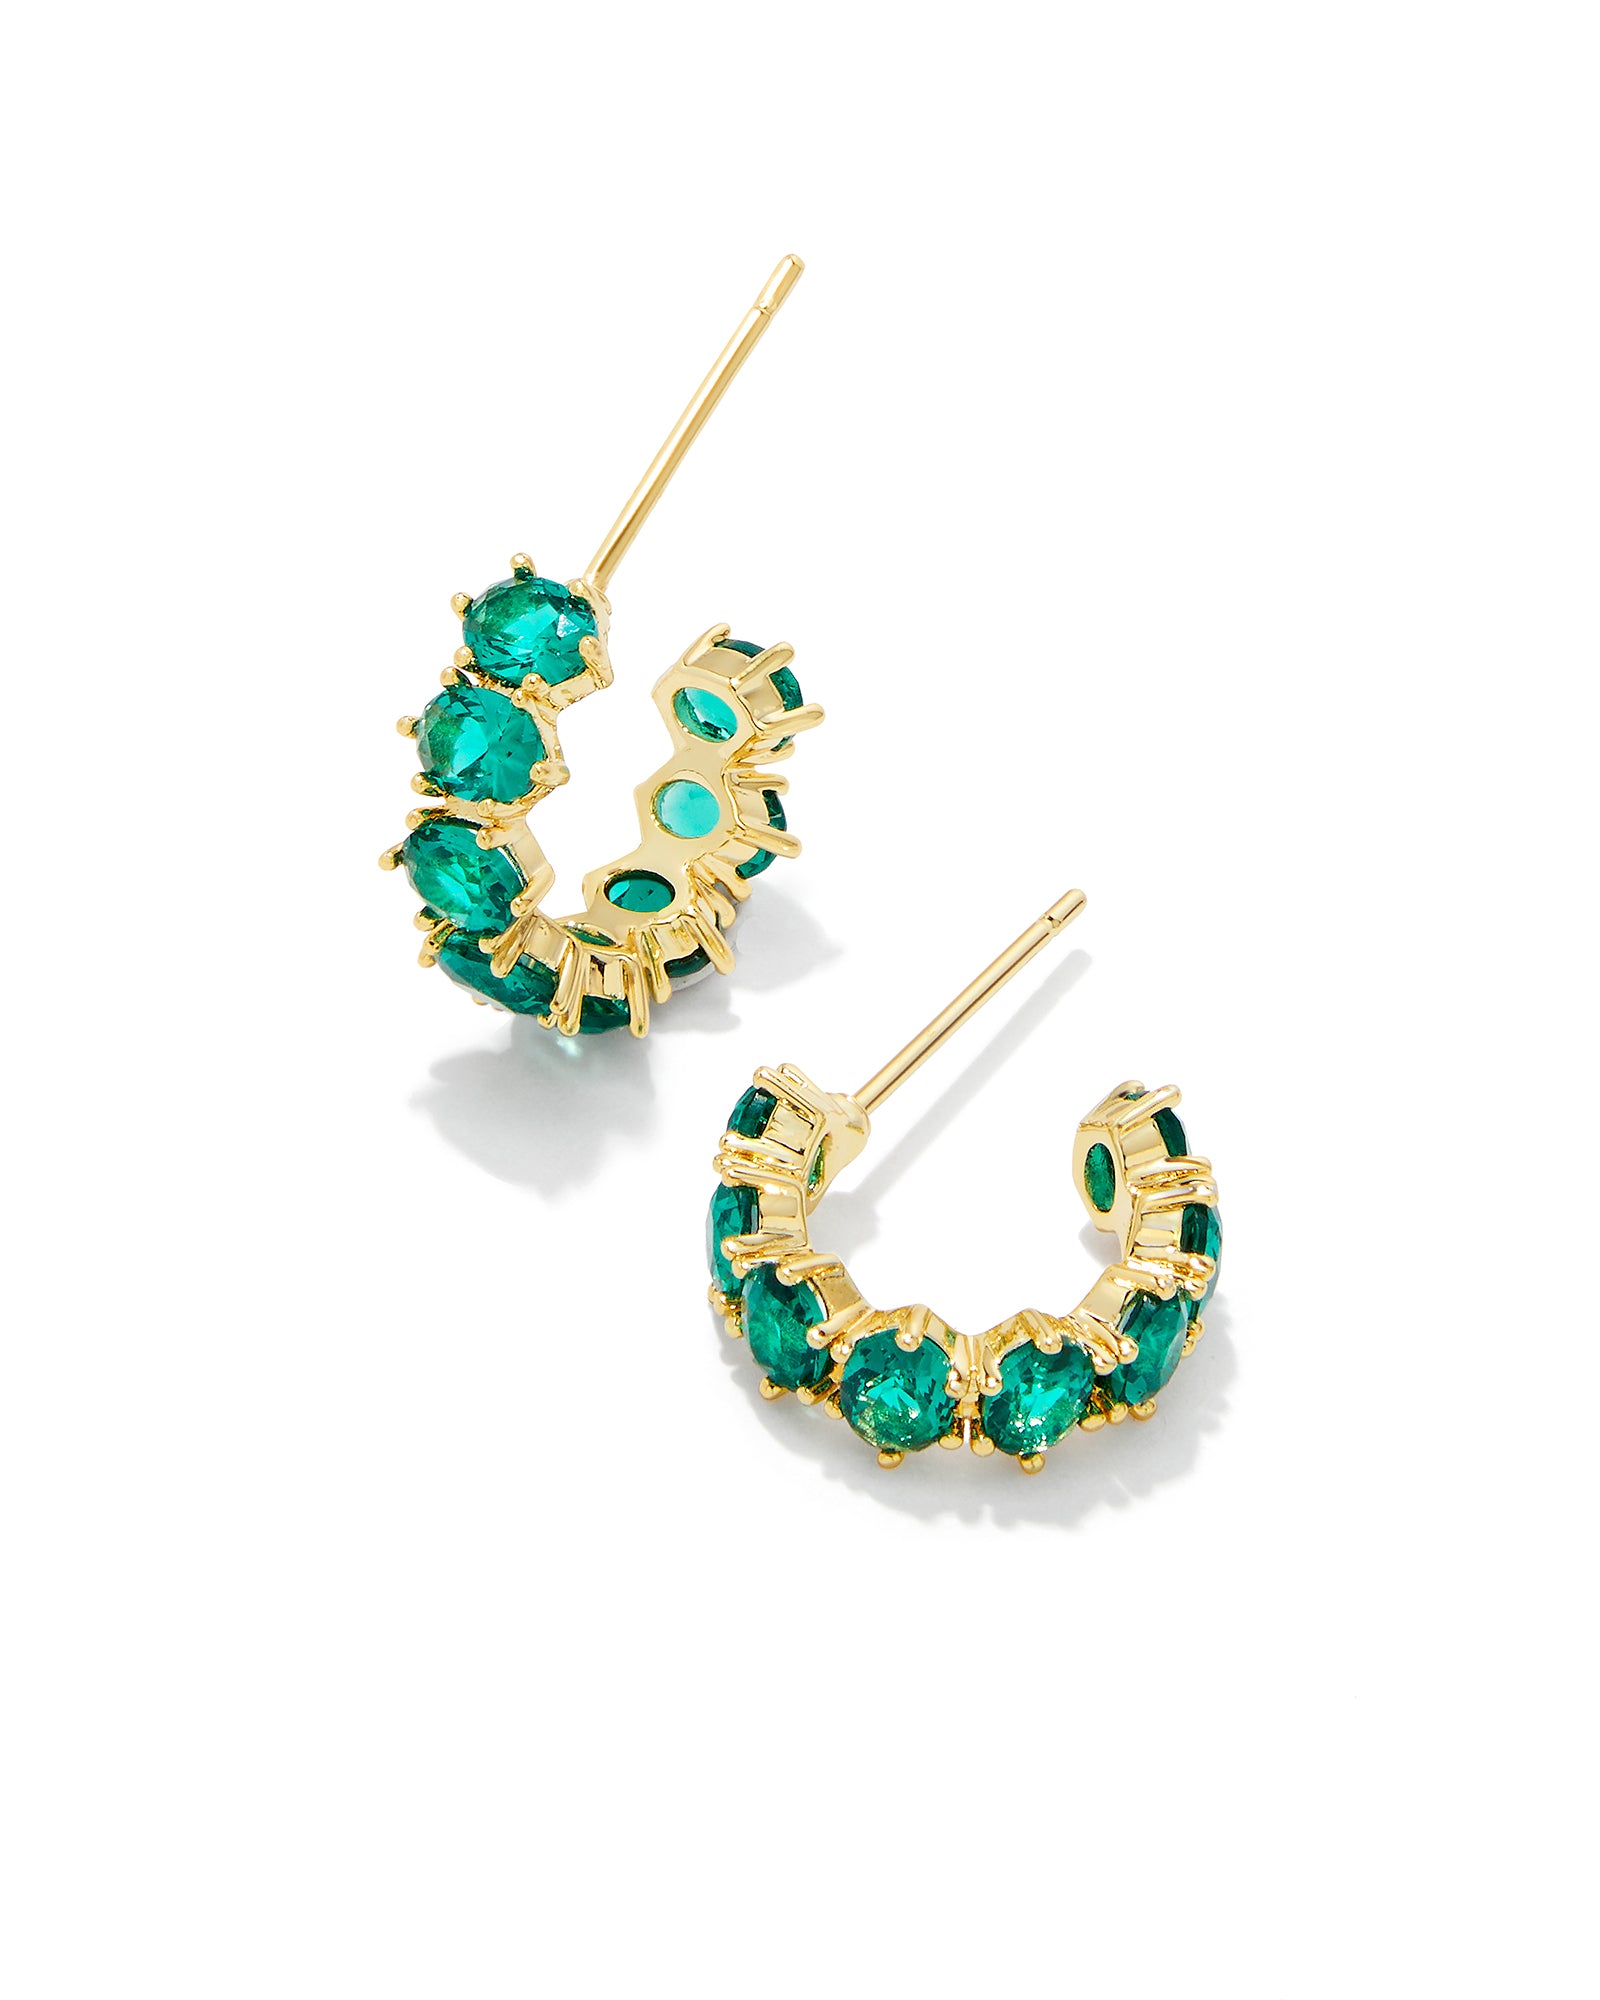 Kendra Scott Cailin Huggie Hoop Earrings in Green Crystal and Gold Plated